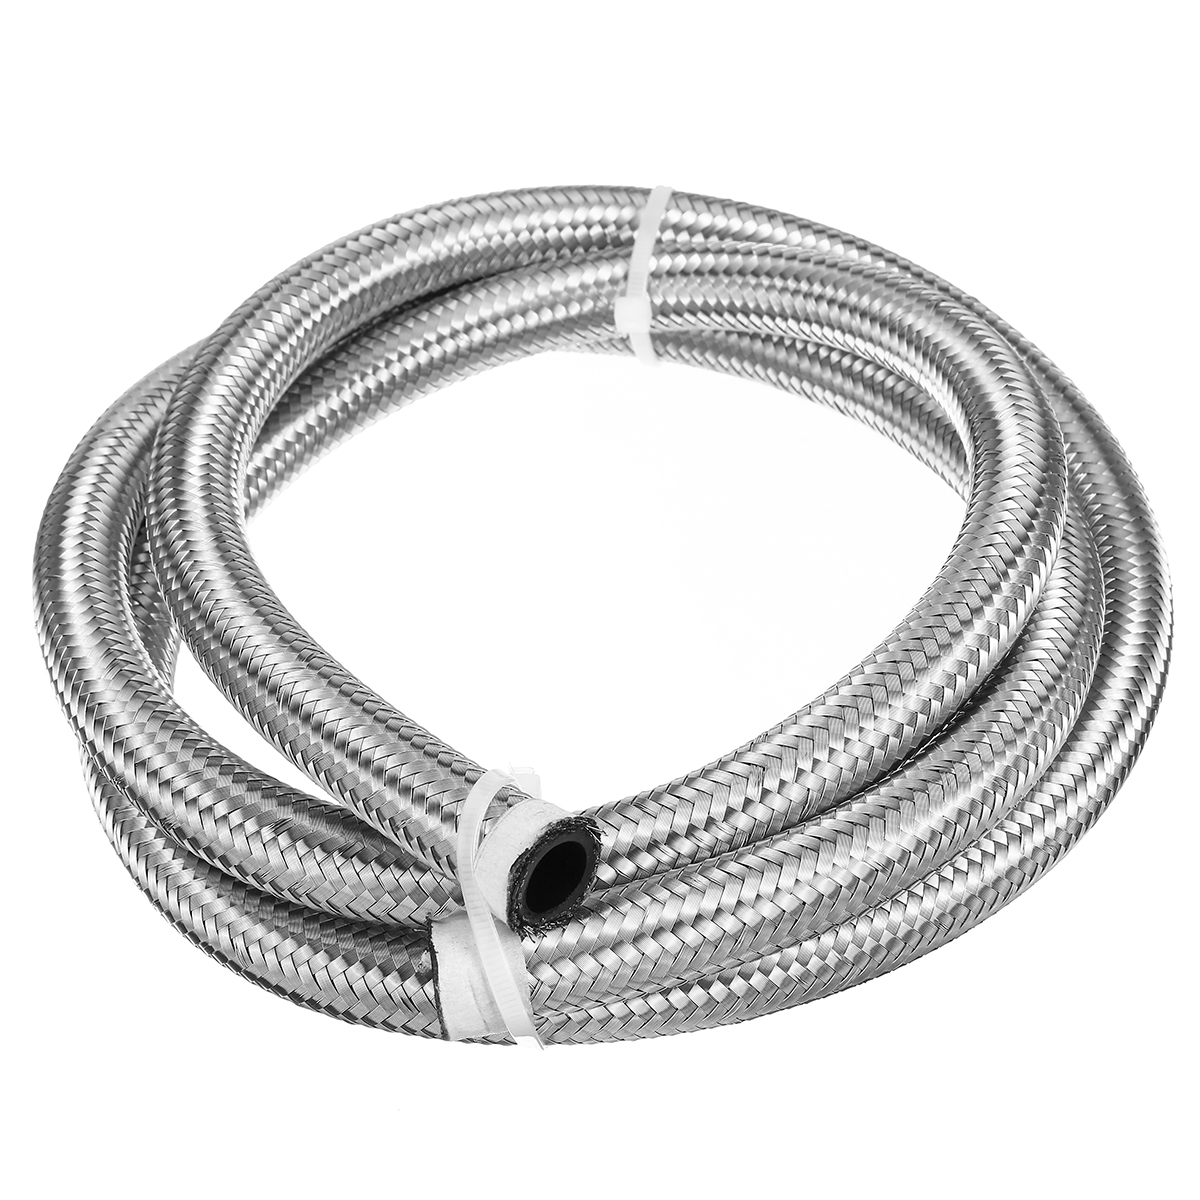 5FT-AN4-AN6-AN8-AN10-Fuel-Hose-Oil-Gas-Line-Pipe-Stainless-Steel-Braided-Silver-1685006-4